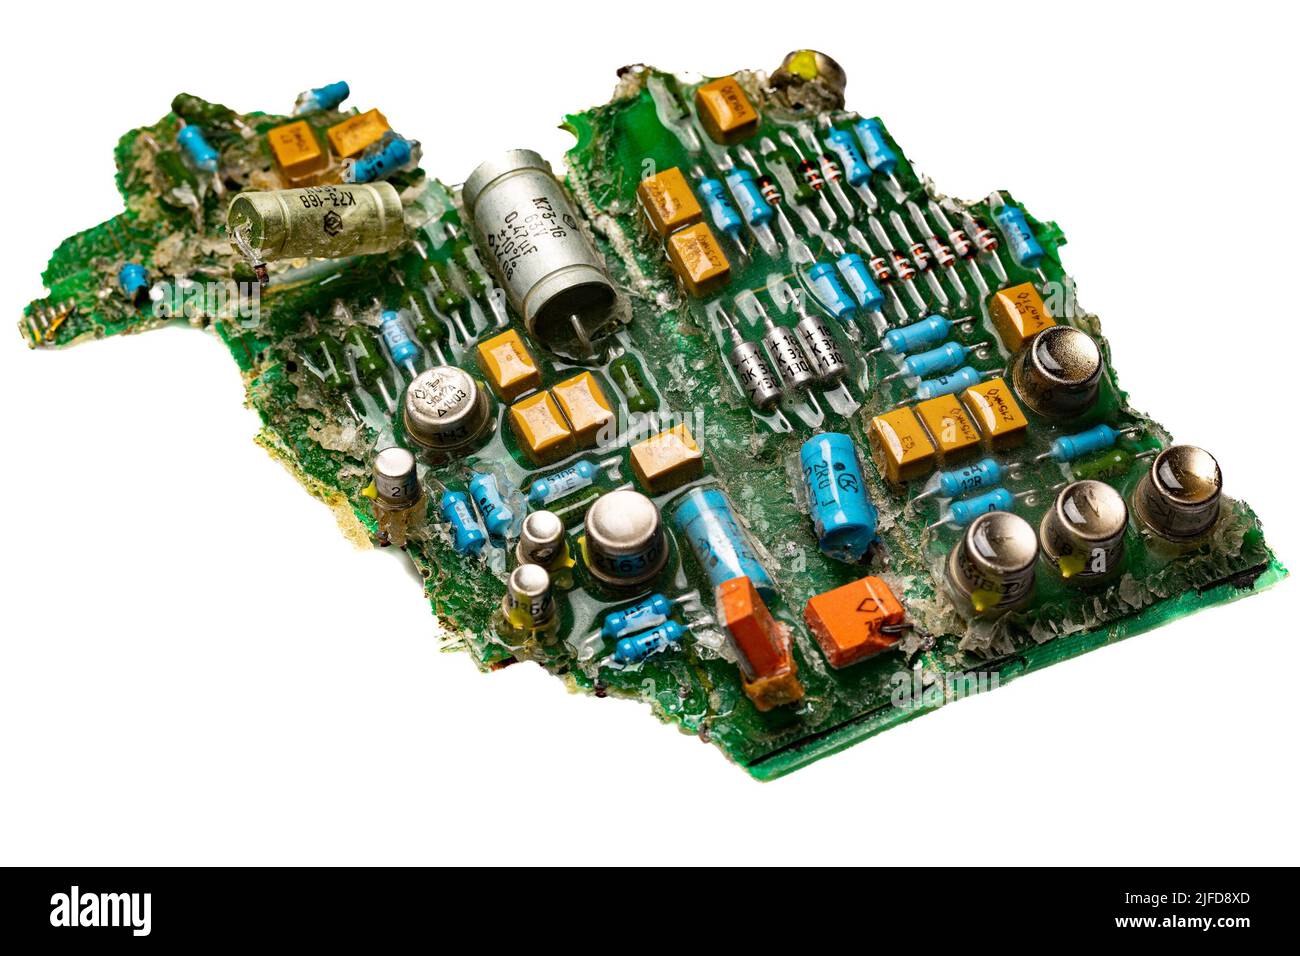 Fragments of the Russian-made Kh-22 anti-ship cruise missile. Debris of electronic boards with electronic components from the Cold War era. Stock Photo